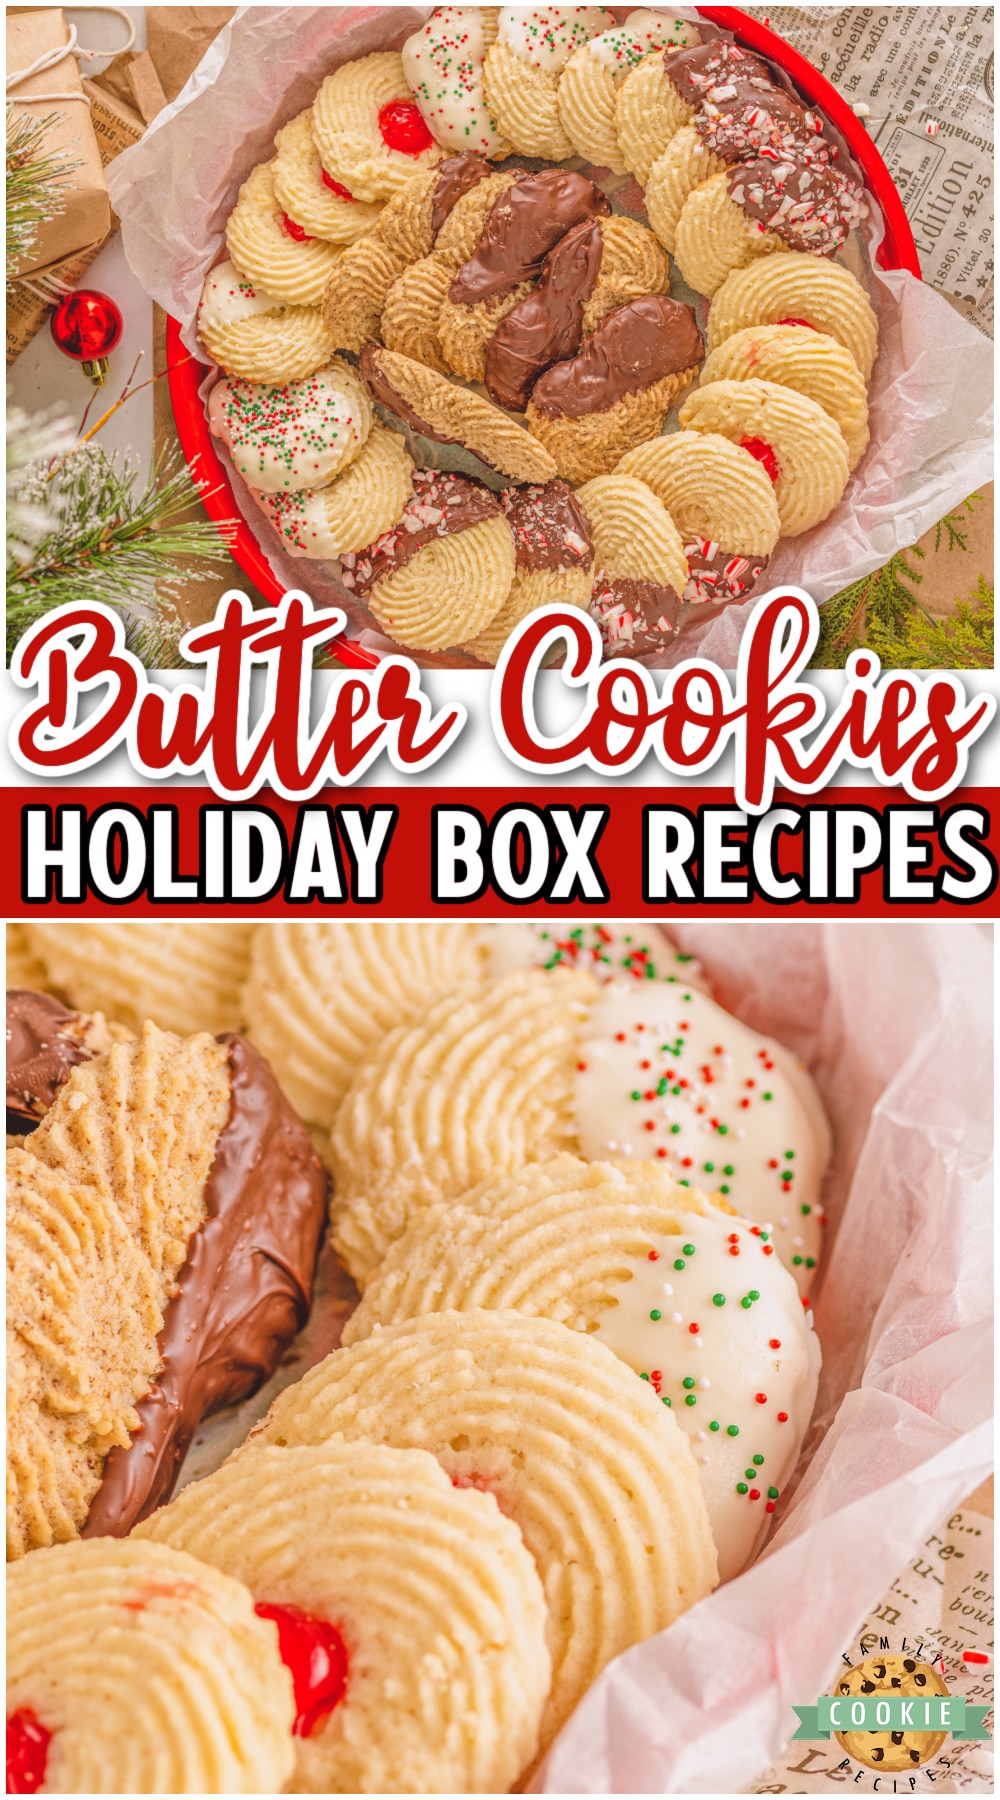 Homemade Butter Cookie Box complete with a basic butter cookie recipe and 4 delicious variations! Tender, buttery cookies in a lovely festive box perfect for holiday gifts!  via @buttergirls